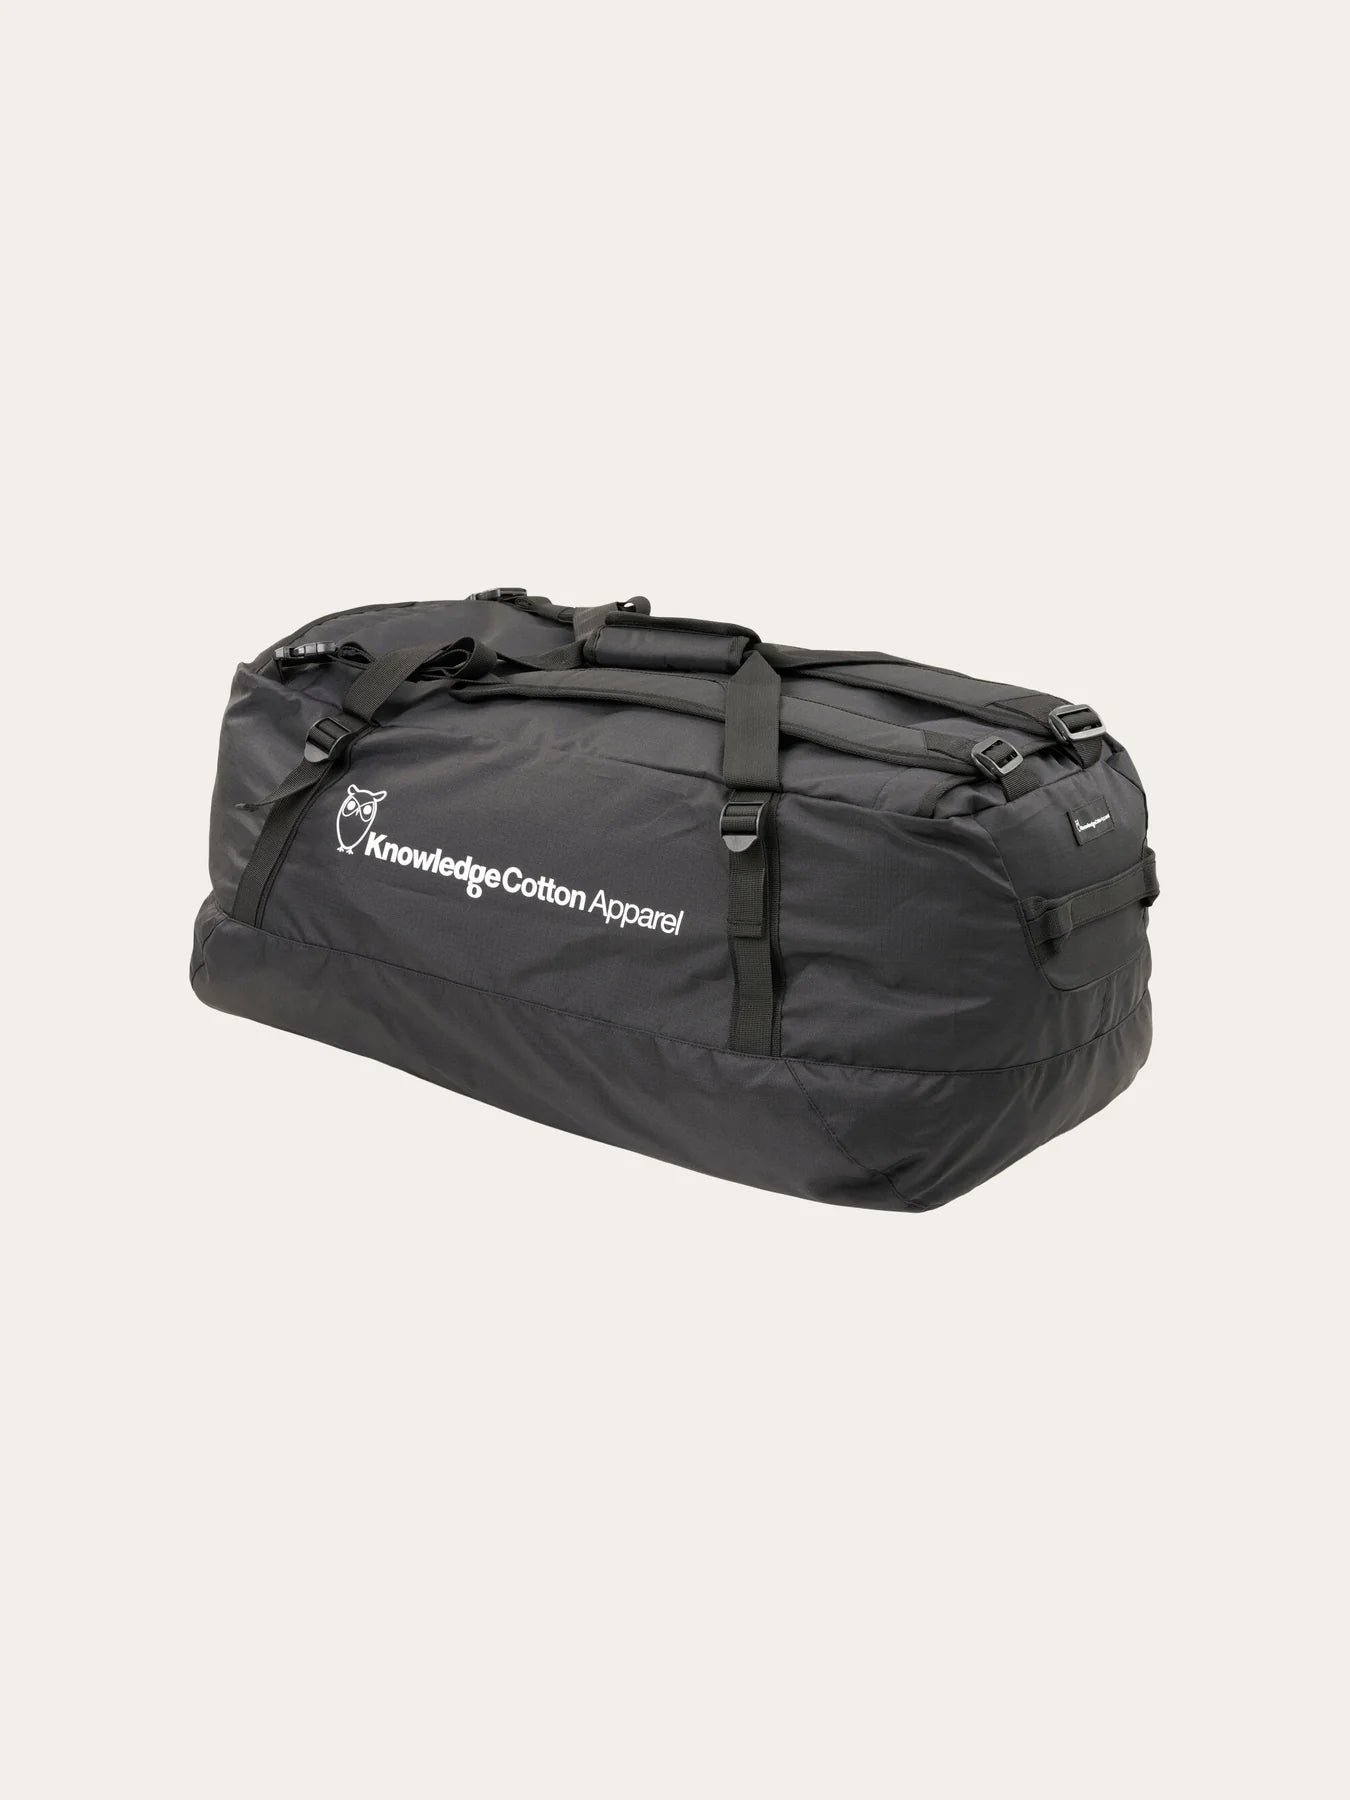 KnowledgeCotton Apparel Packable Duffel Backpack 50L - Recycled PET Black Jet Bags